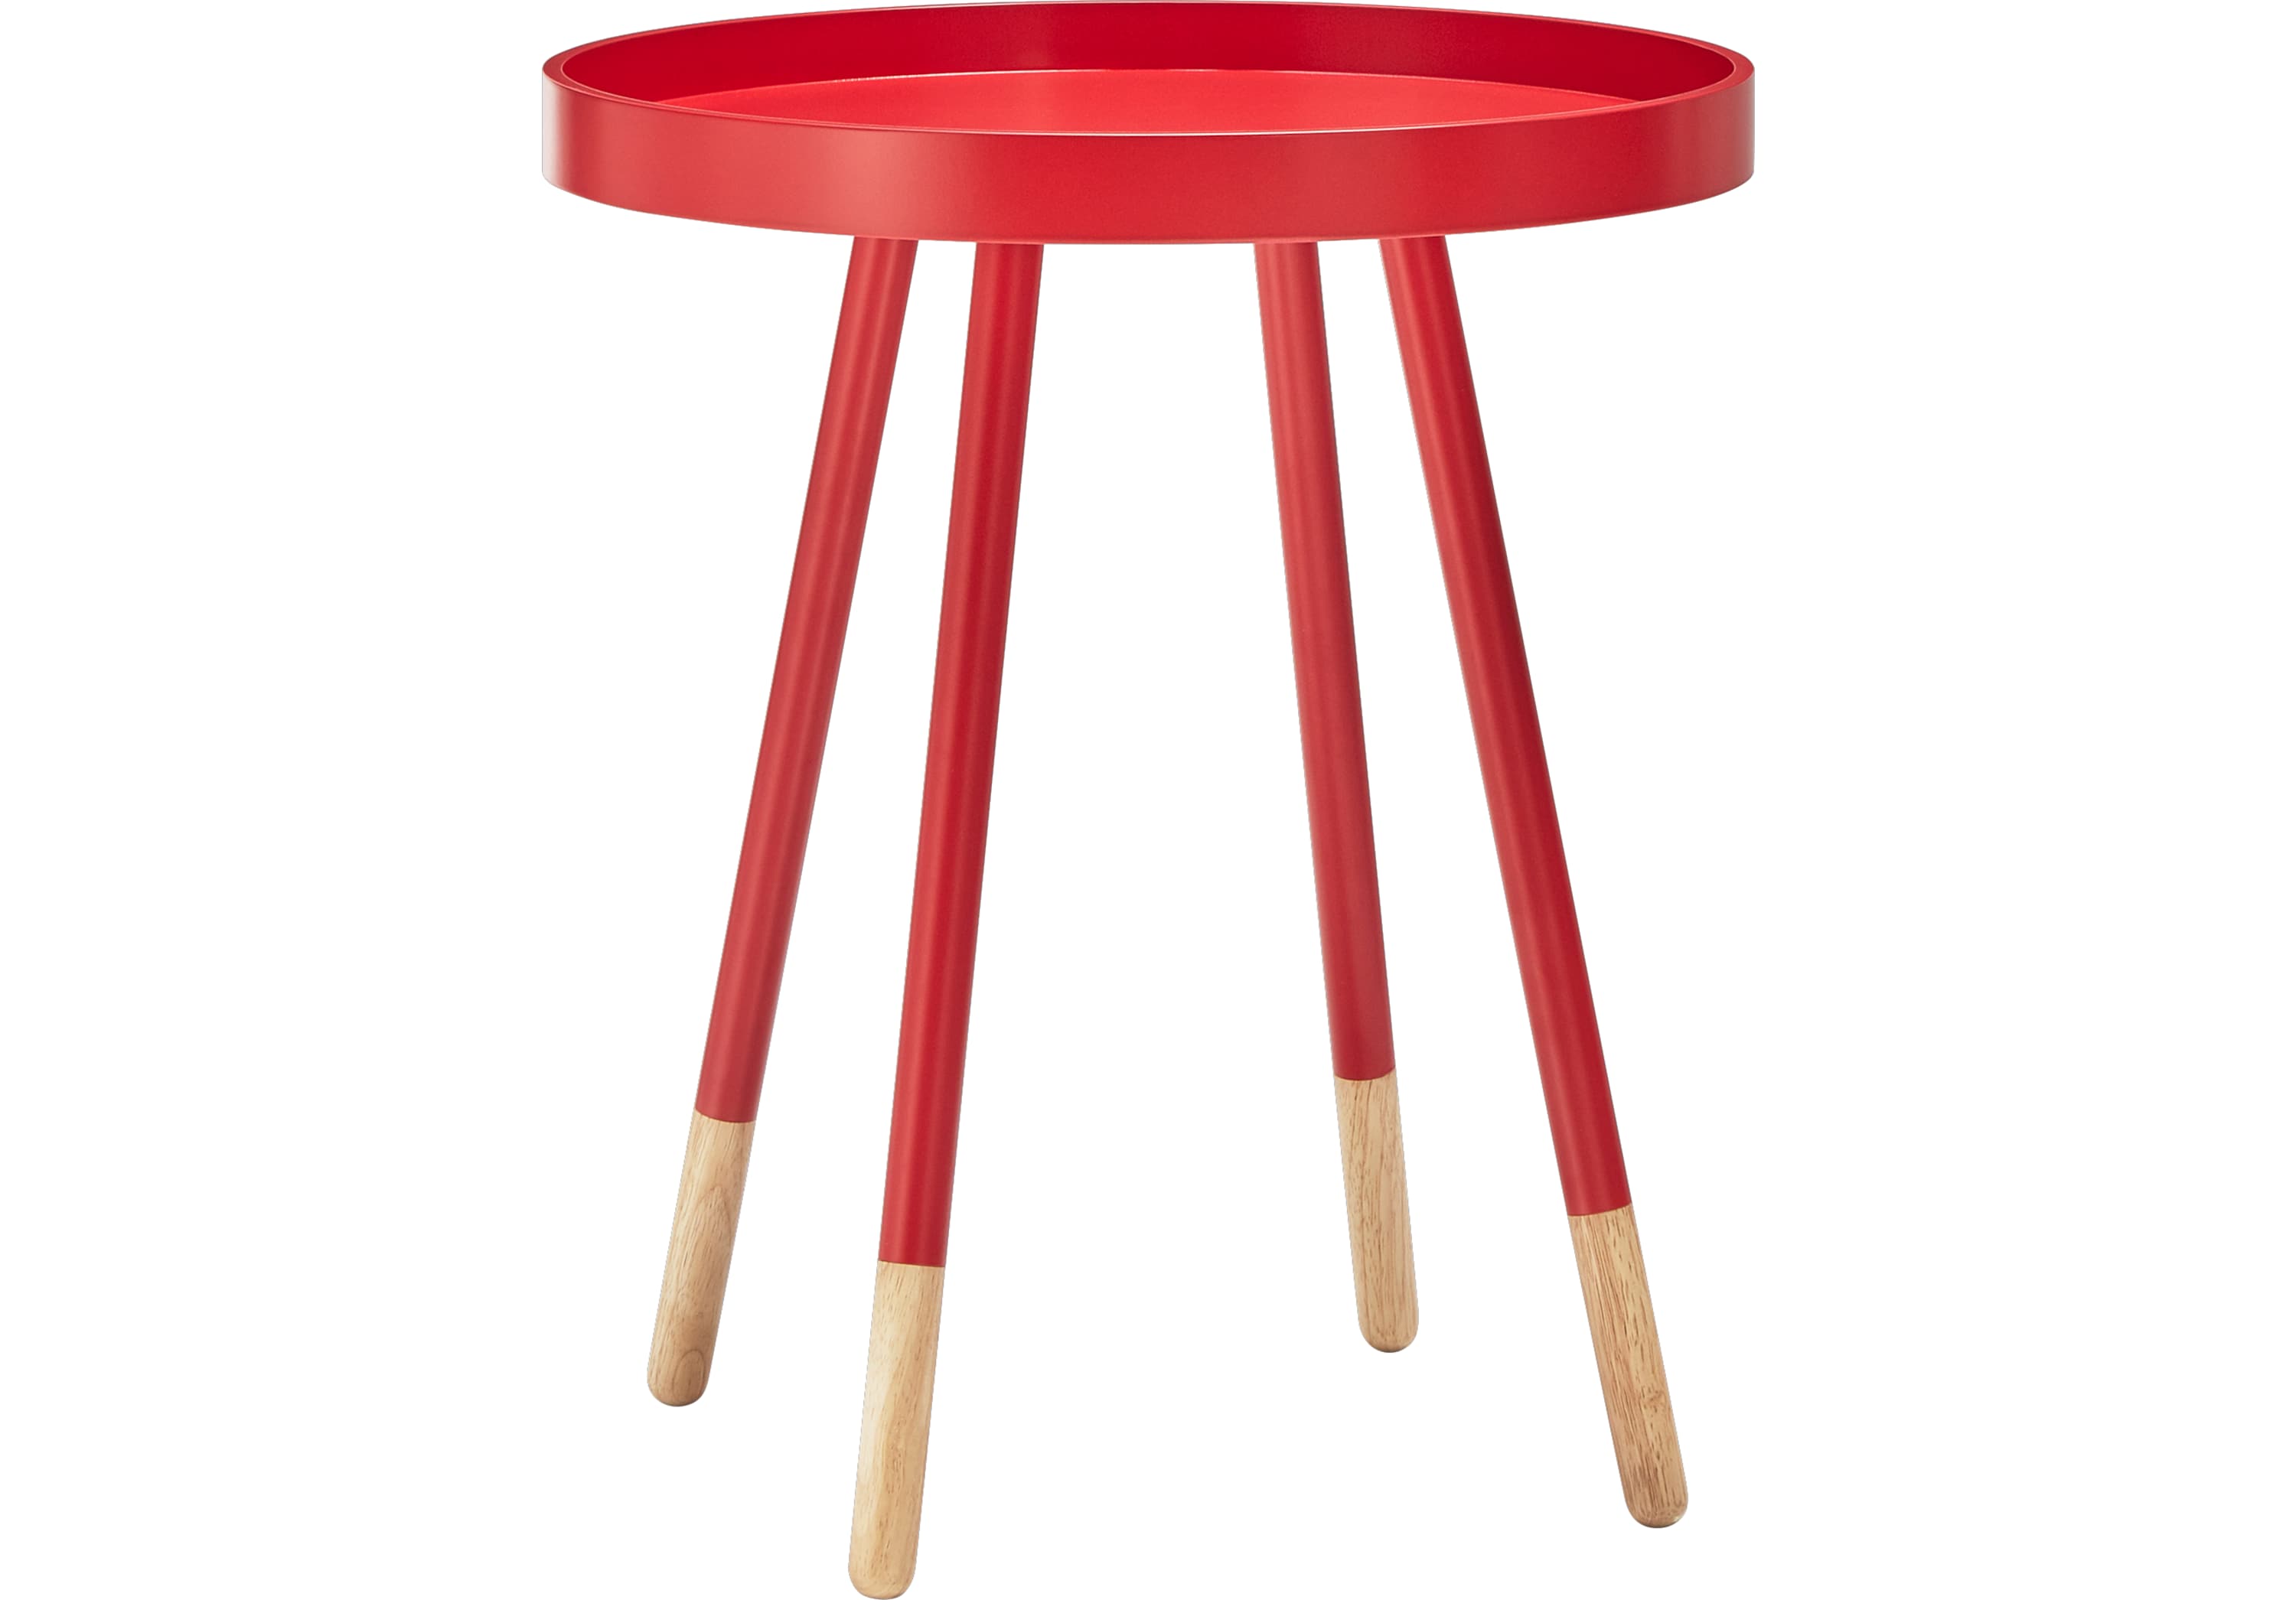 sibley lane red accent table items colors sibleylane wood roll over zoom coastal inspired lamps barbie doll furniture ikea desk corner side with shelves target hourglass winsome